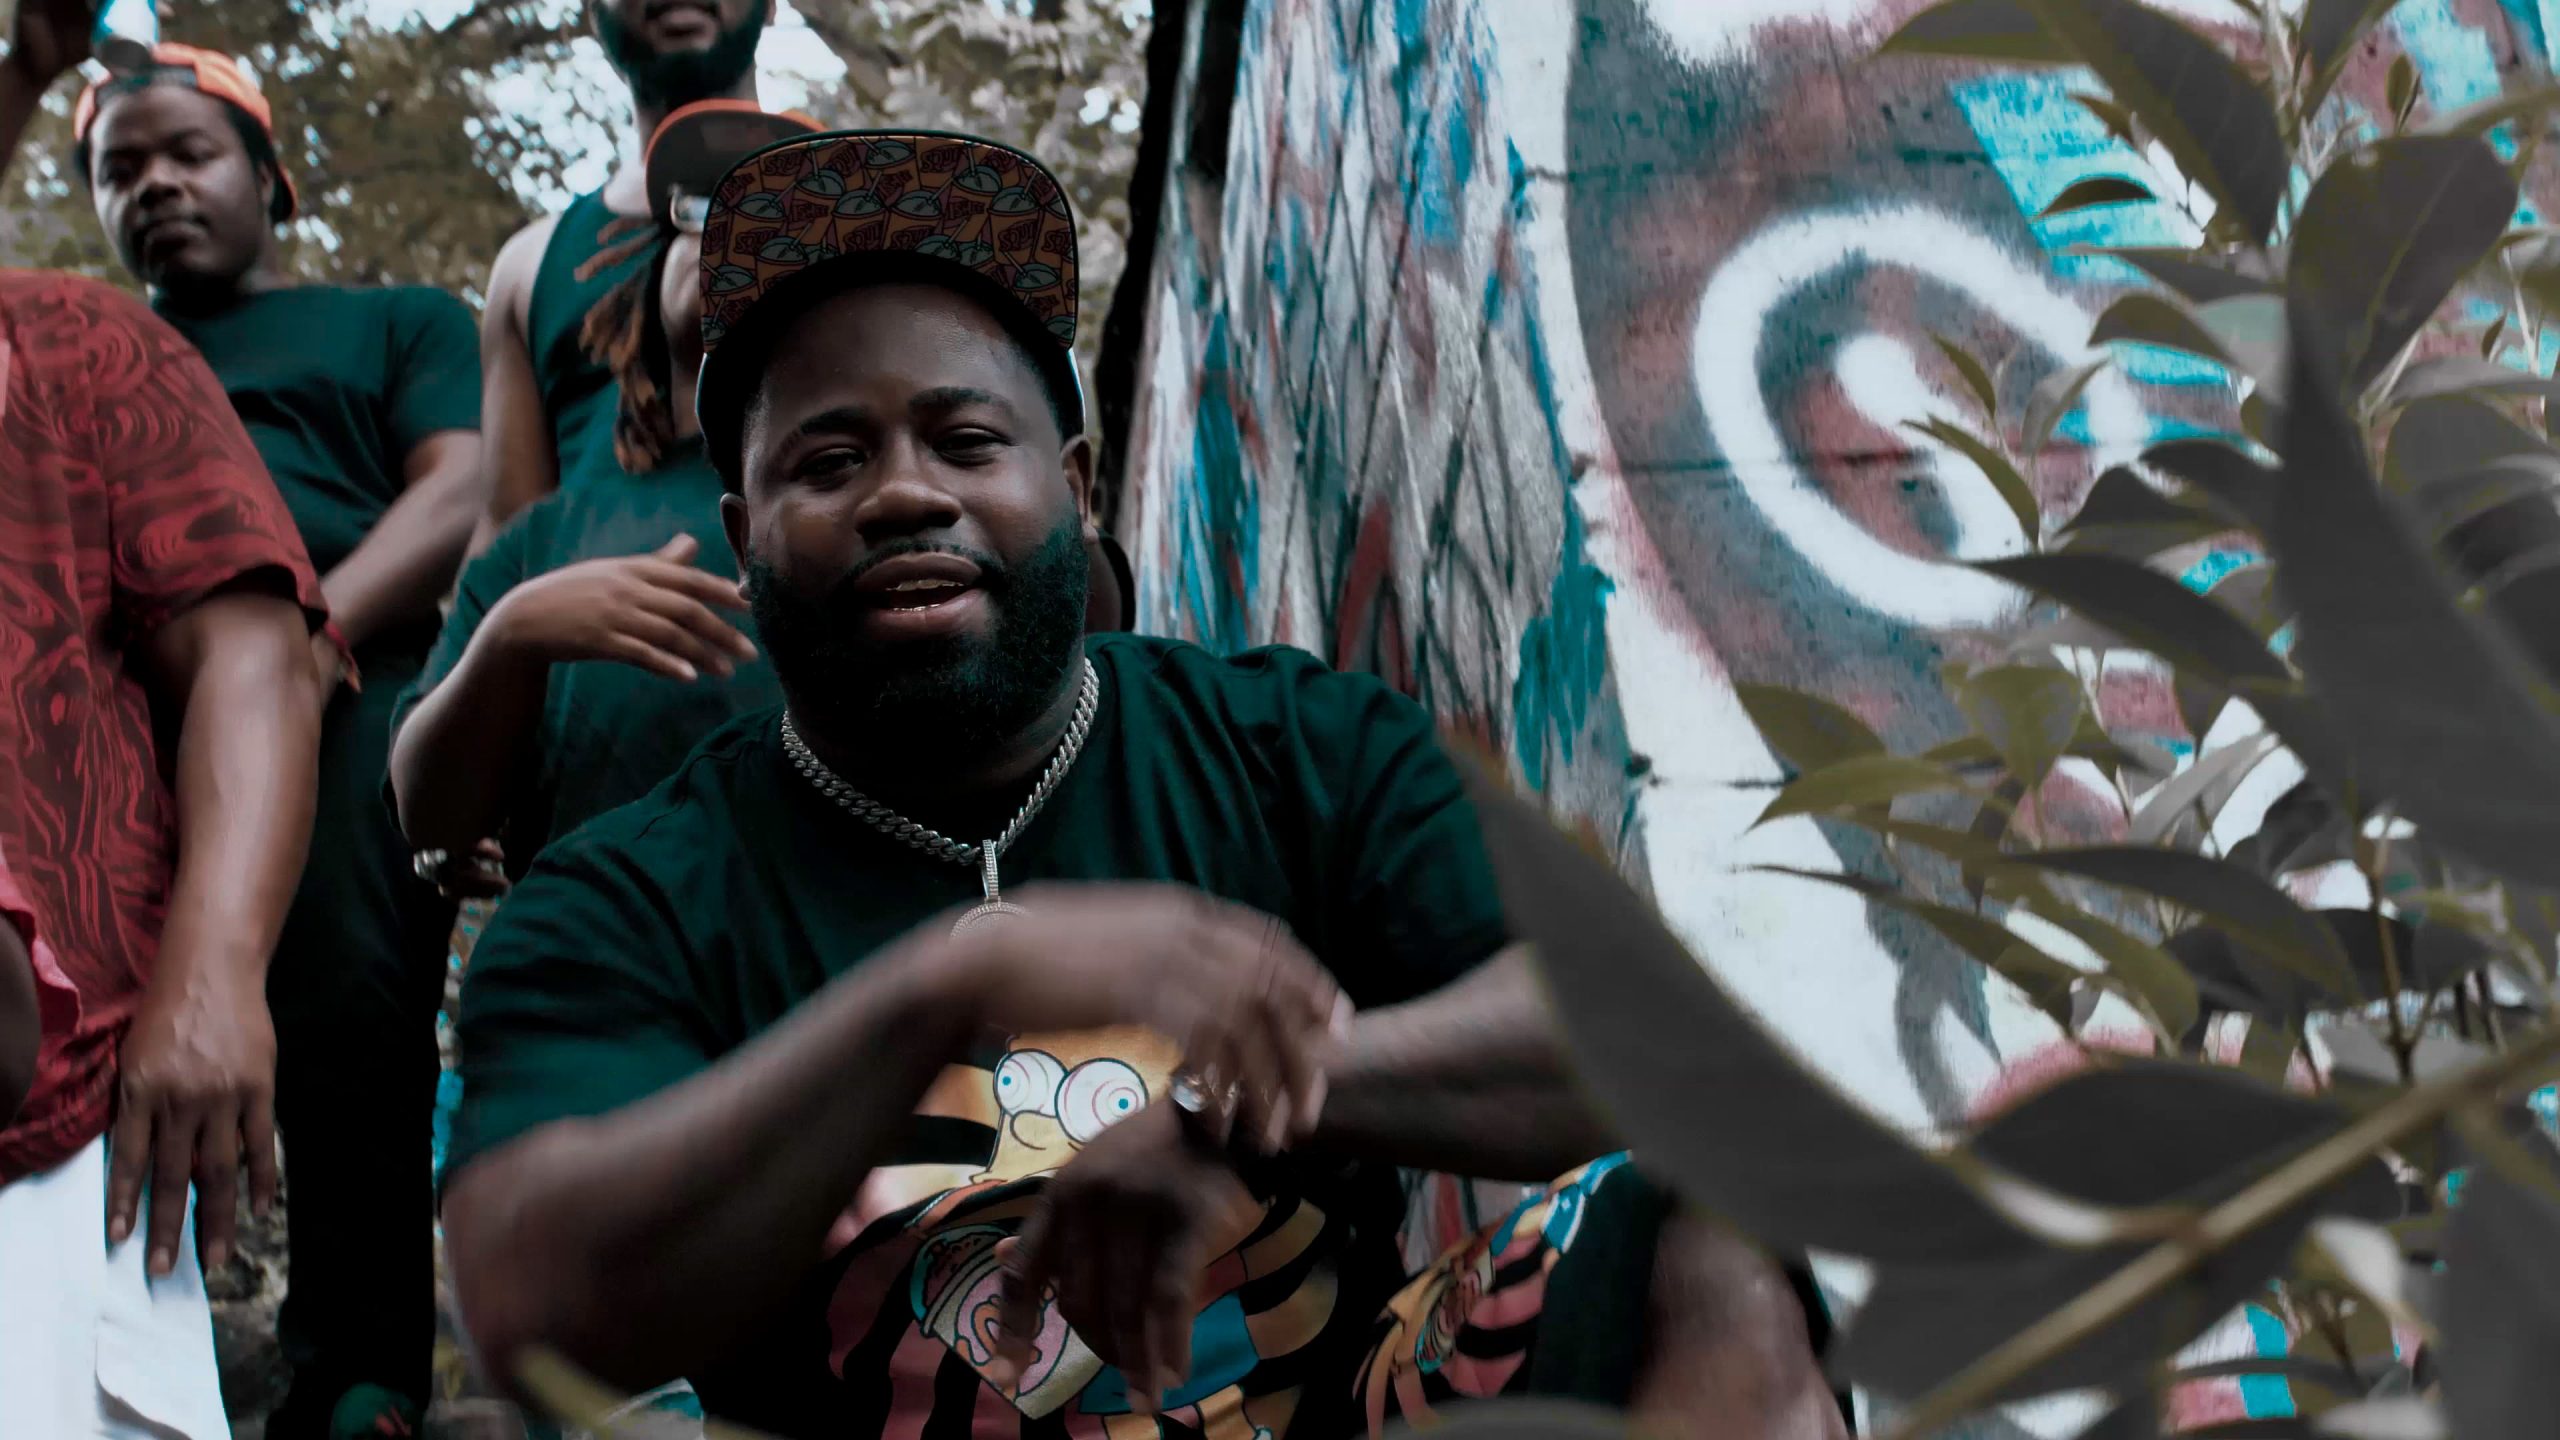 ‘J profitts’ drops new single and video ‘MYBROTHERSKEEPER’ X Mr.365.